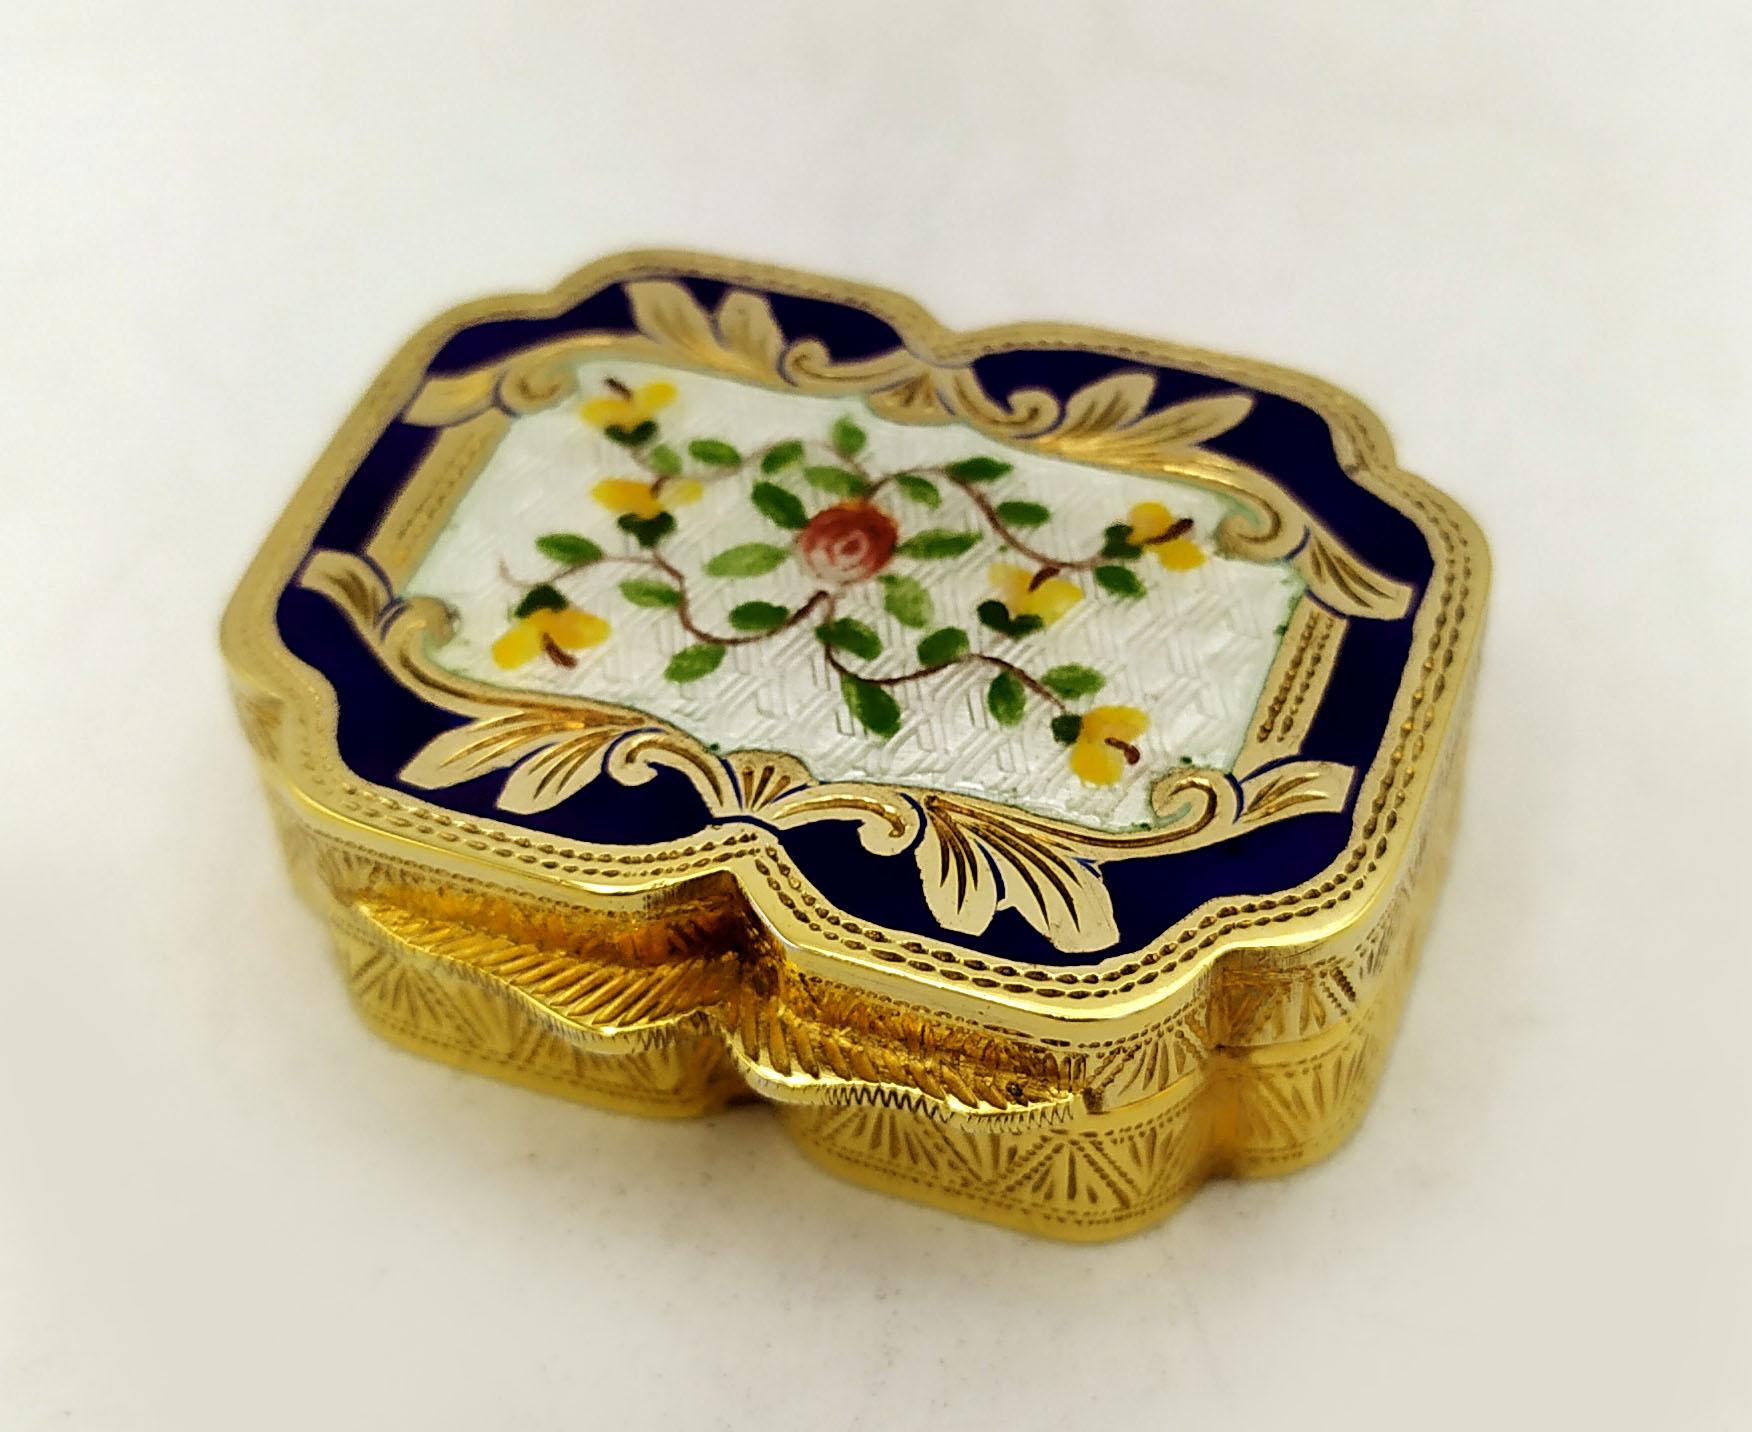 Hand-Carved Pill Box Silver Sterling Enamel hand-painted floral miniature Salimbeni